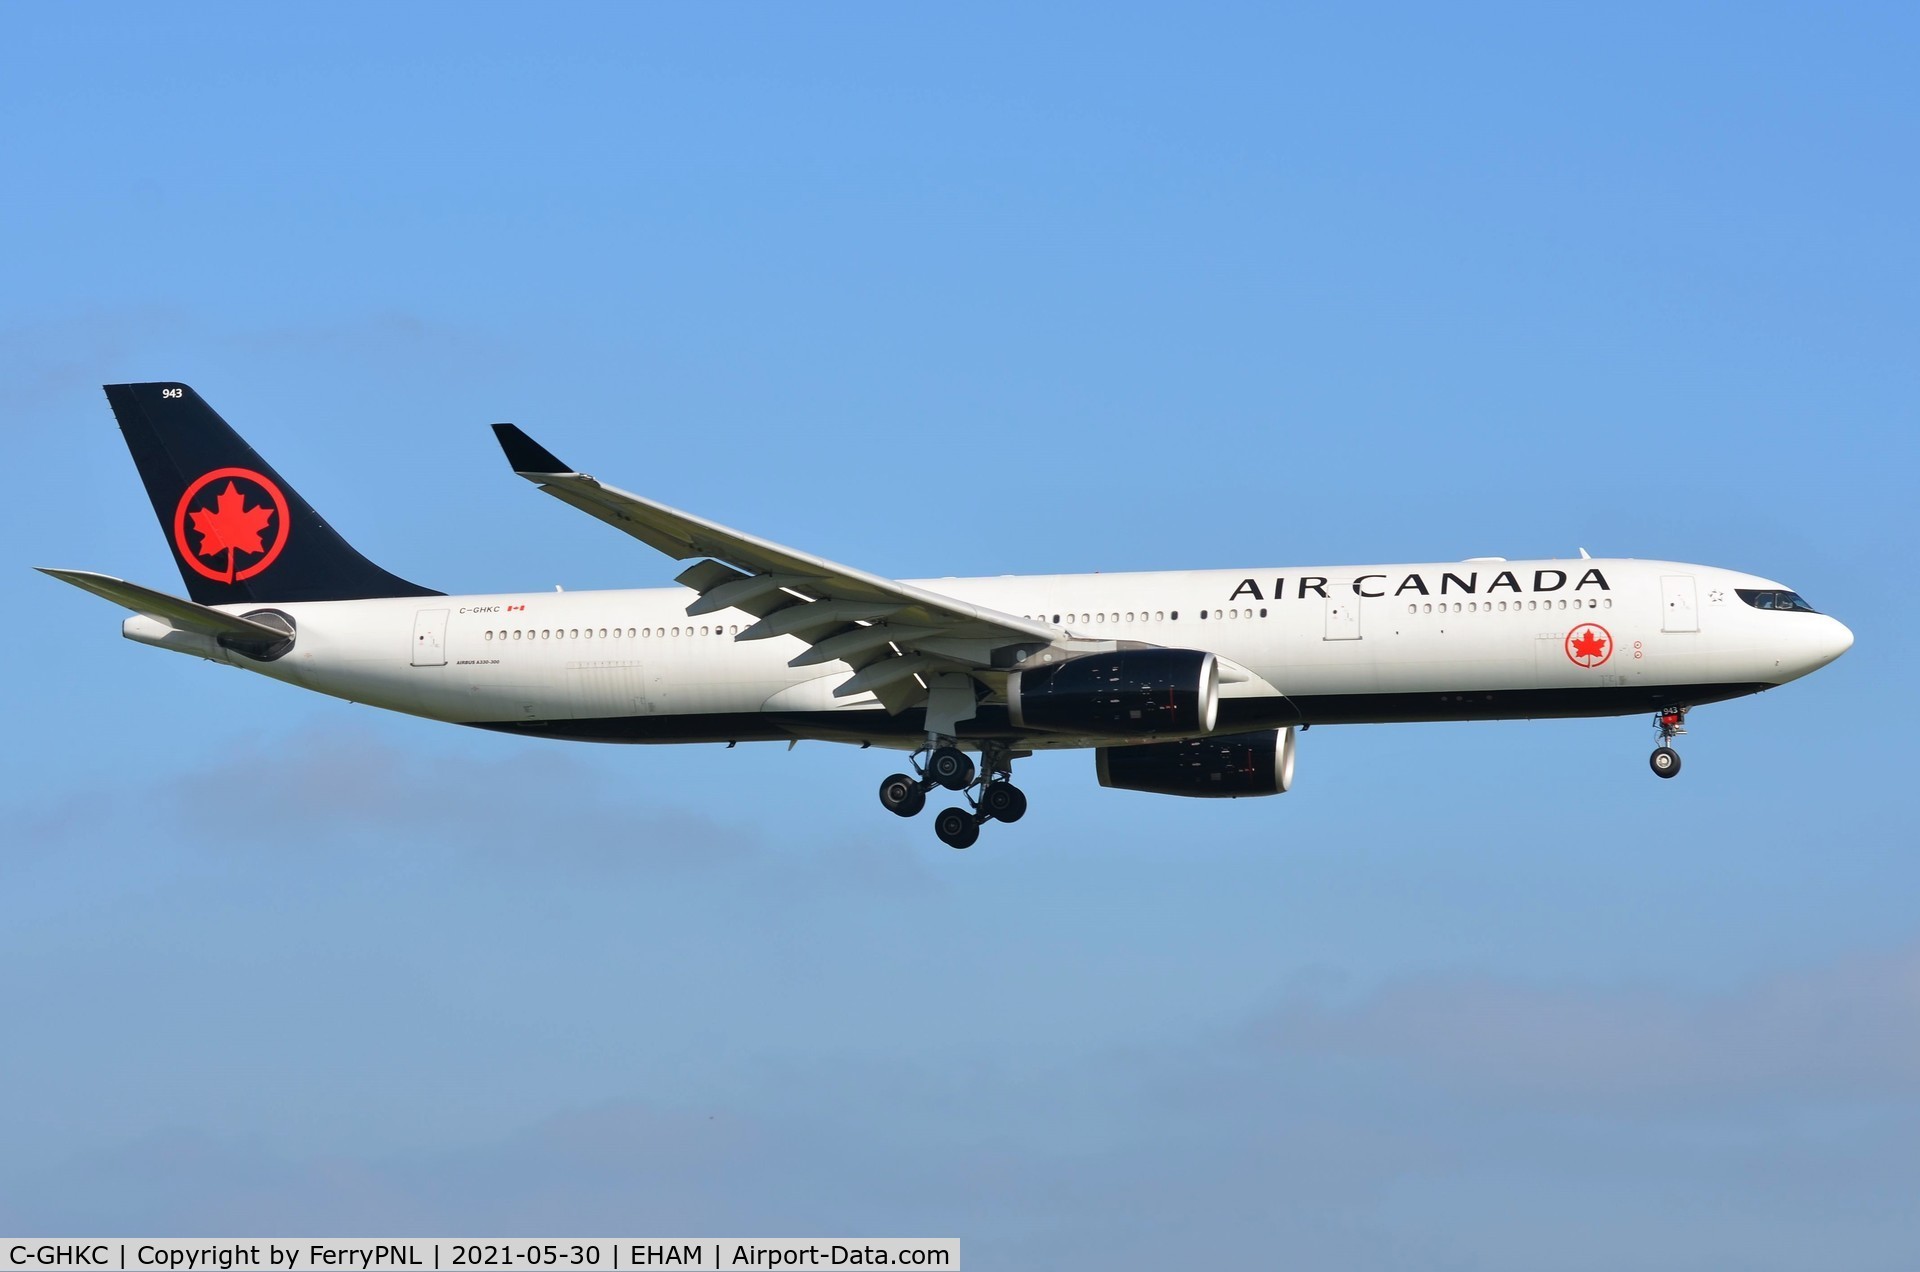 C-GHKC, 2009 Airbus A330-343X C/N 986, Air Canada A333 arriving on a cargo only flight